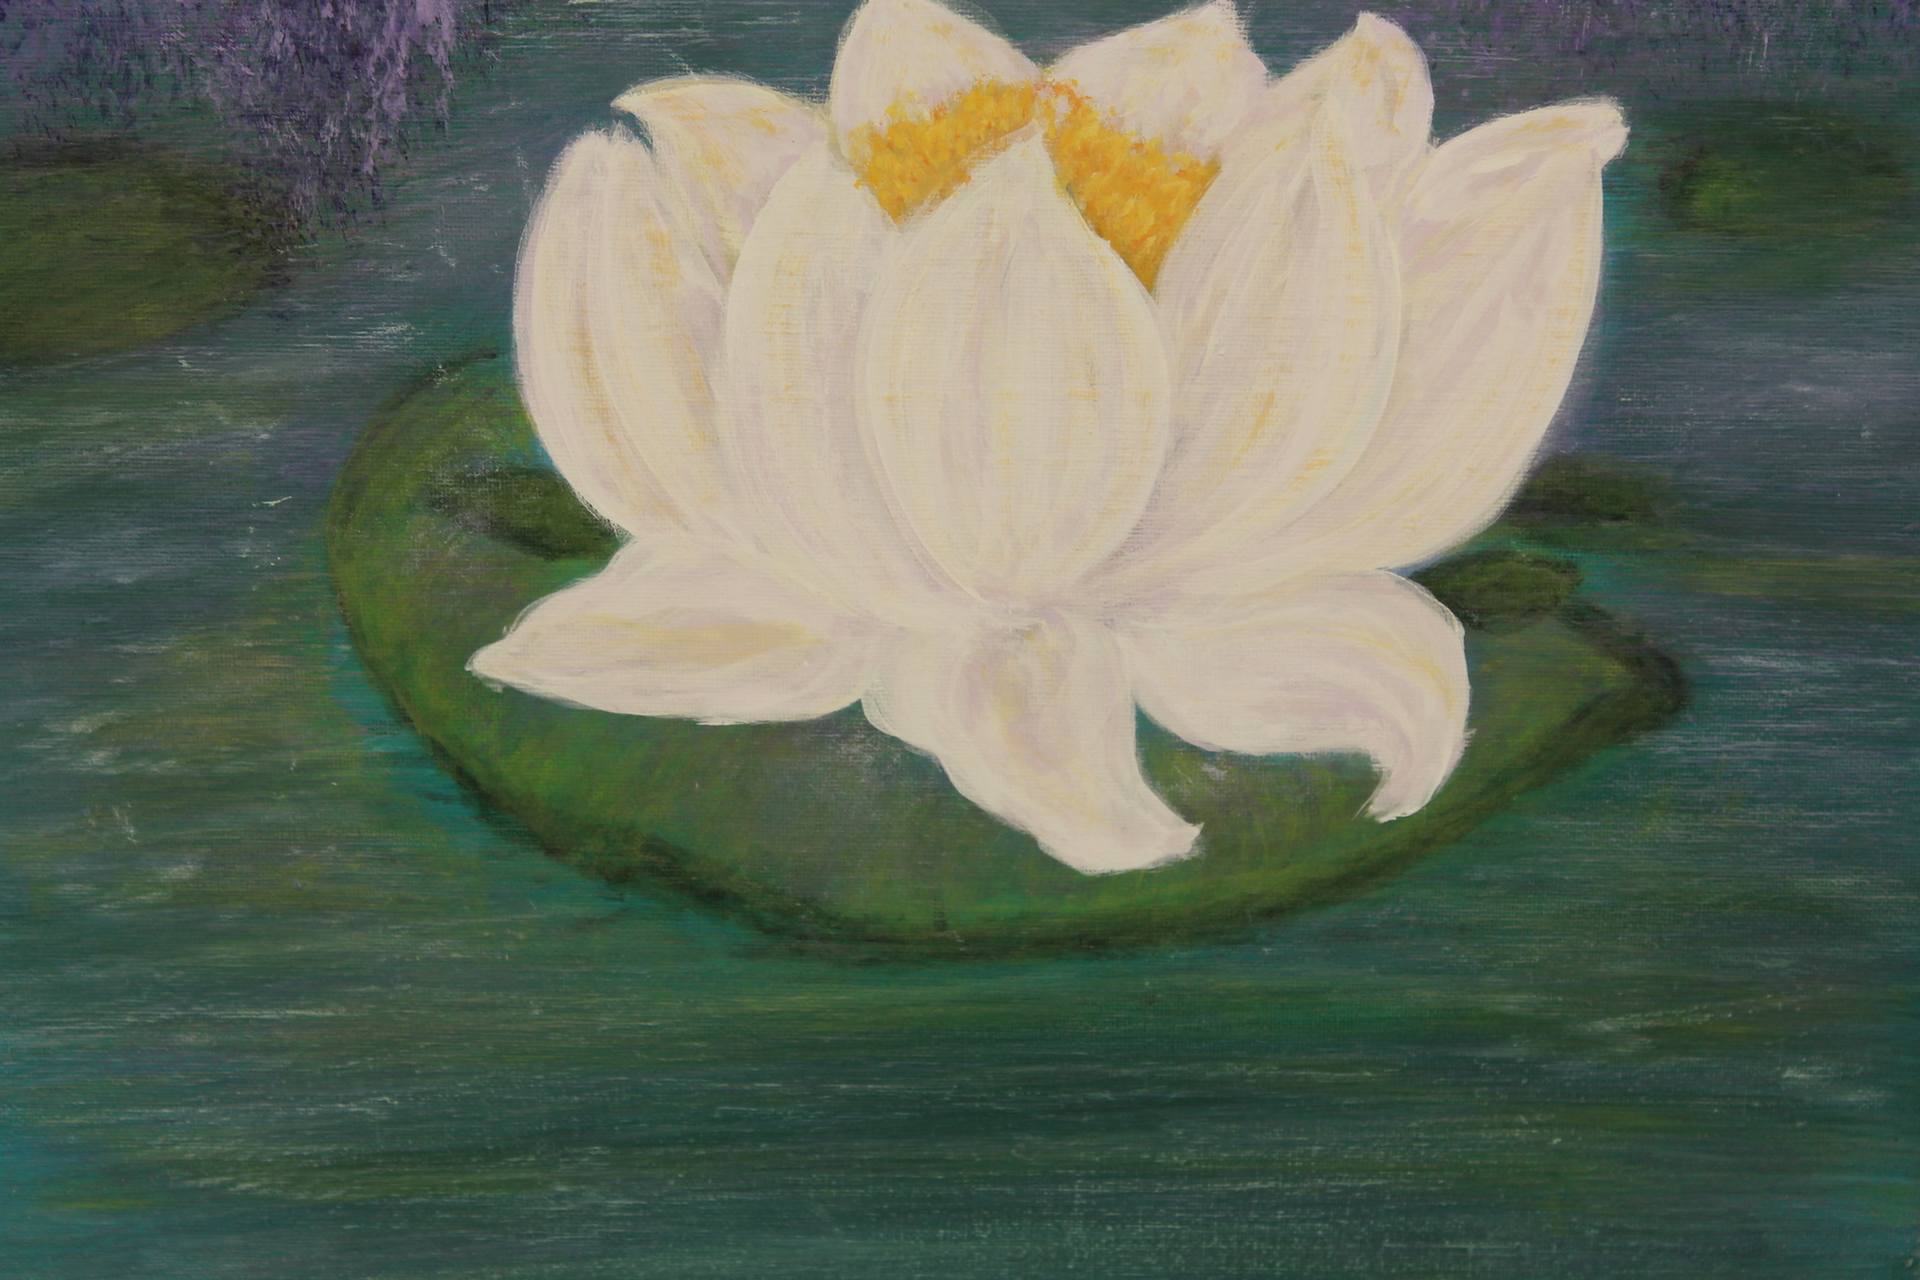 Saatchi Art: Water Lily and Wisteria Painting by Krystal Gray